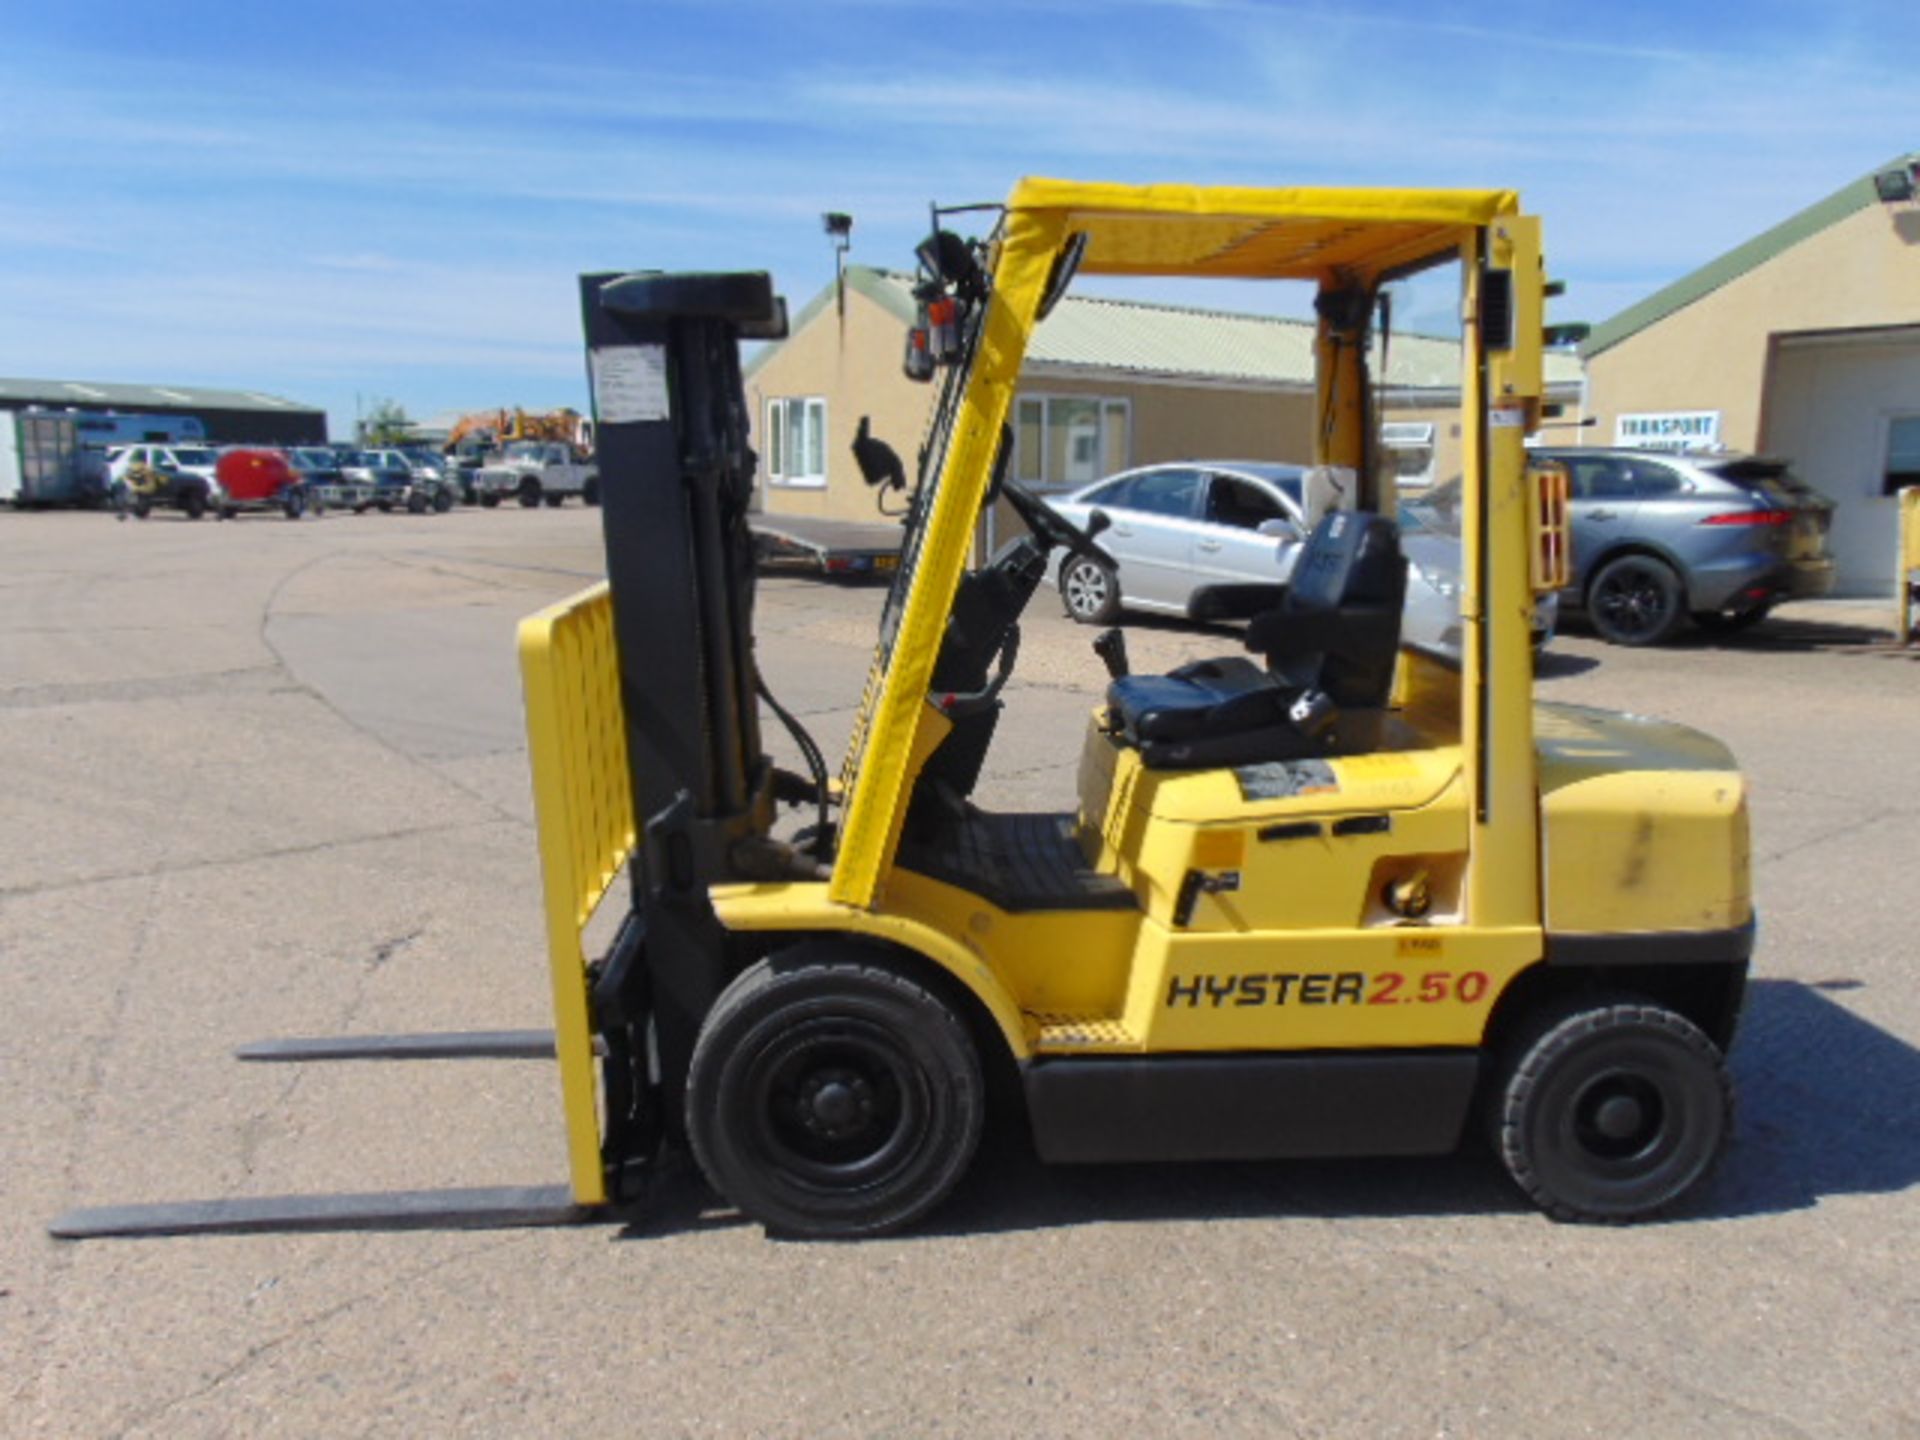 Hyster 2.50 Class C, Zone 2 Protected Diesel Forklift ONLY 763.4 hours!! - Bild 5 aus 29